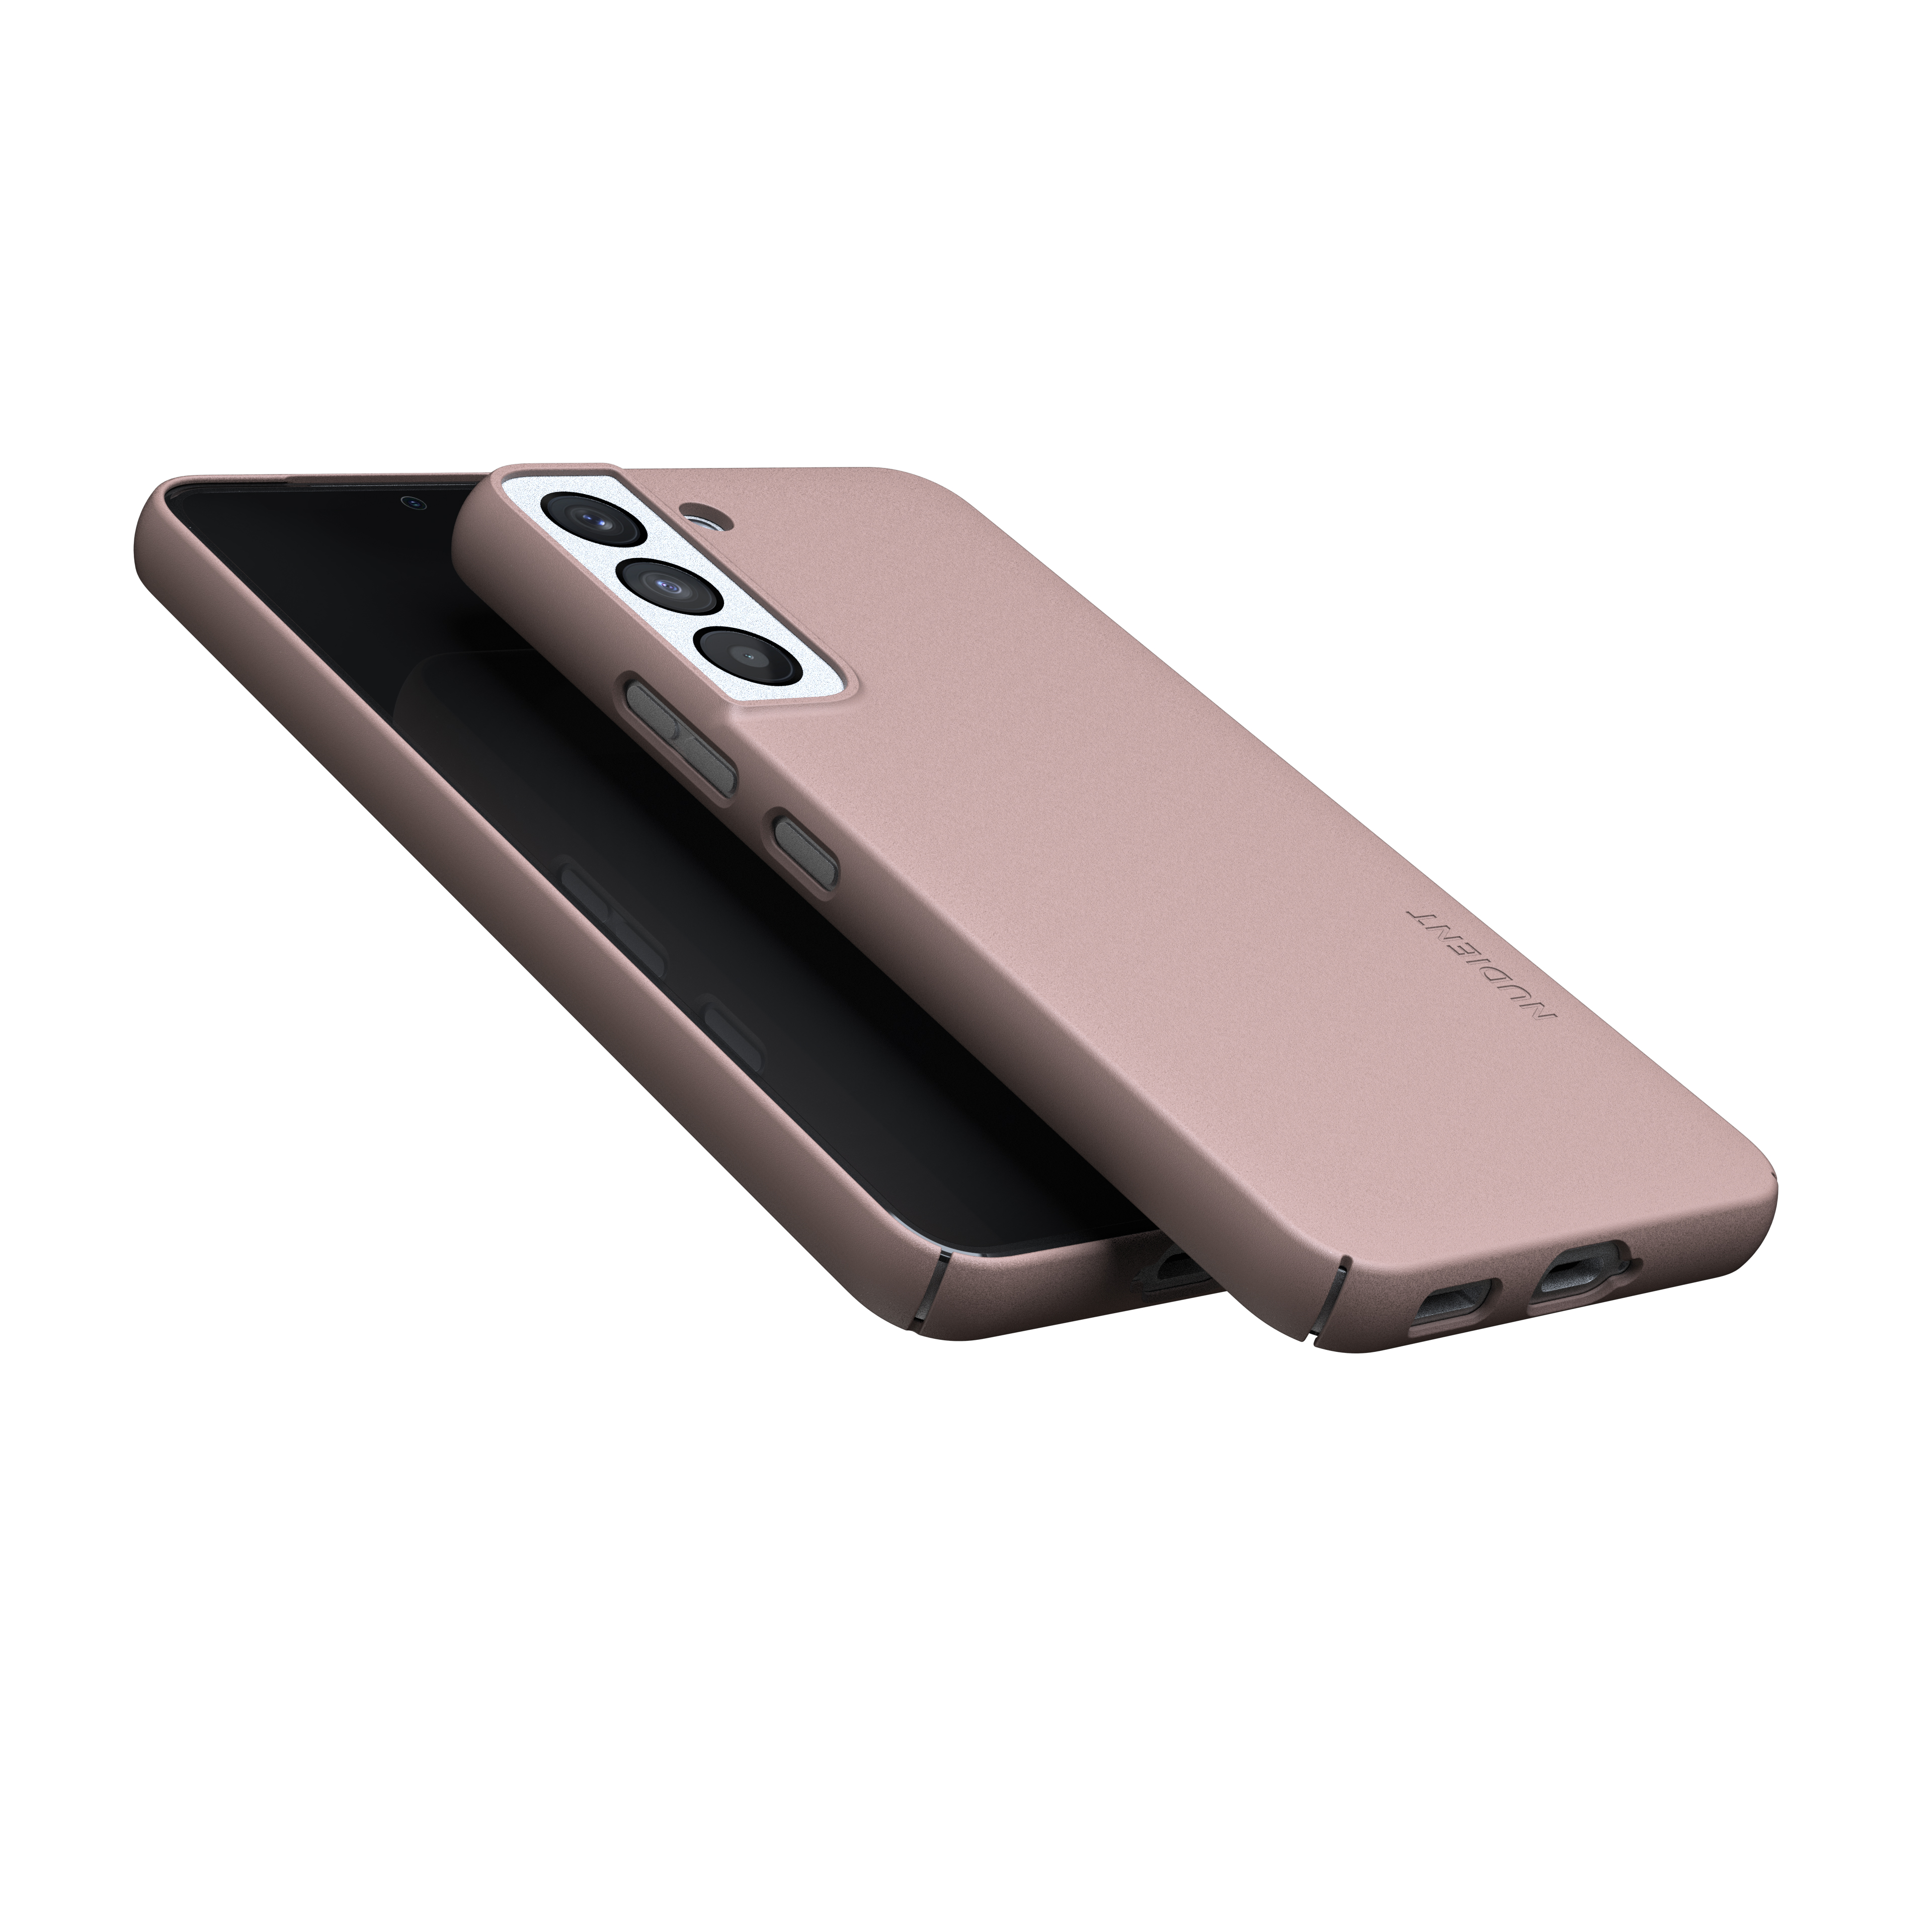 Backcover, Case Thin PINK S22, GALAXY V3, NUDIENT SAMSUNG,